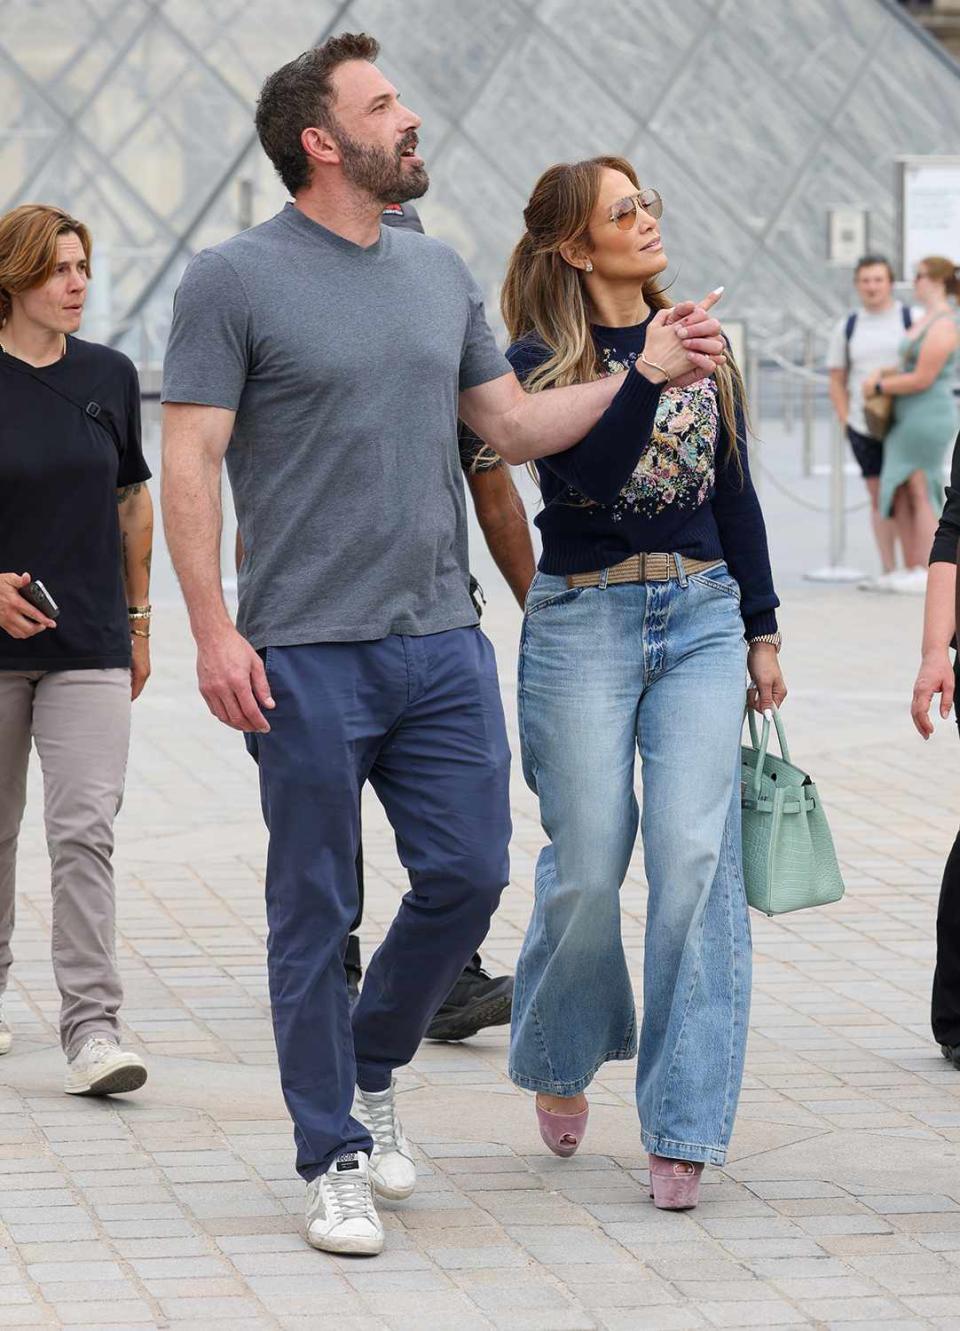 Jennifer Lopez and Ben Affleck are seen at the Louvre Museum on July 26, 2022 in Paris, France.